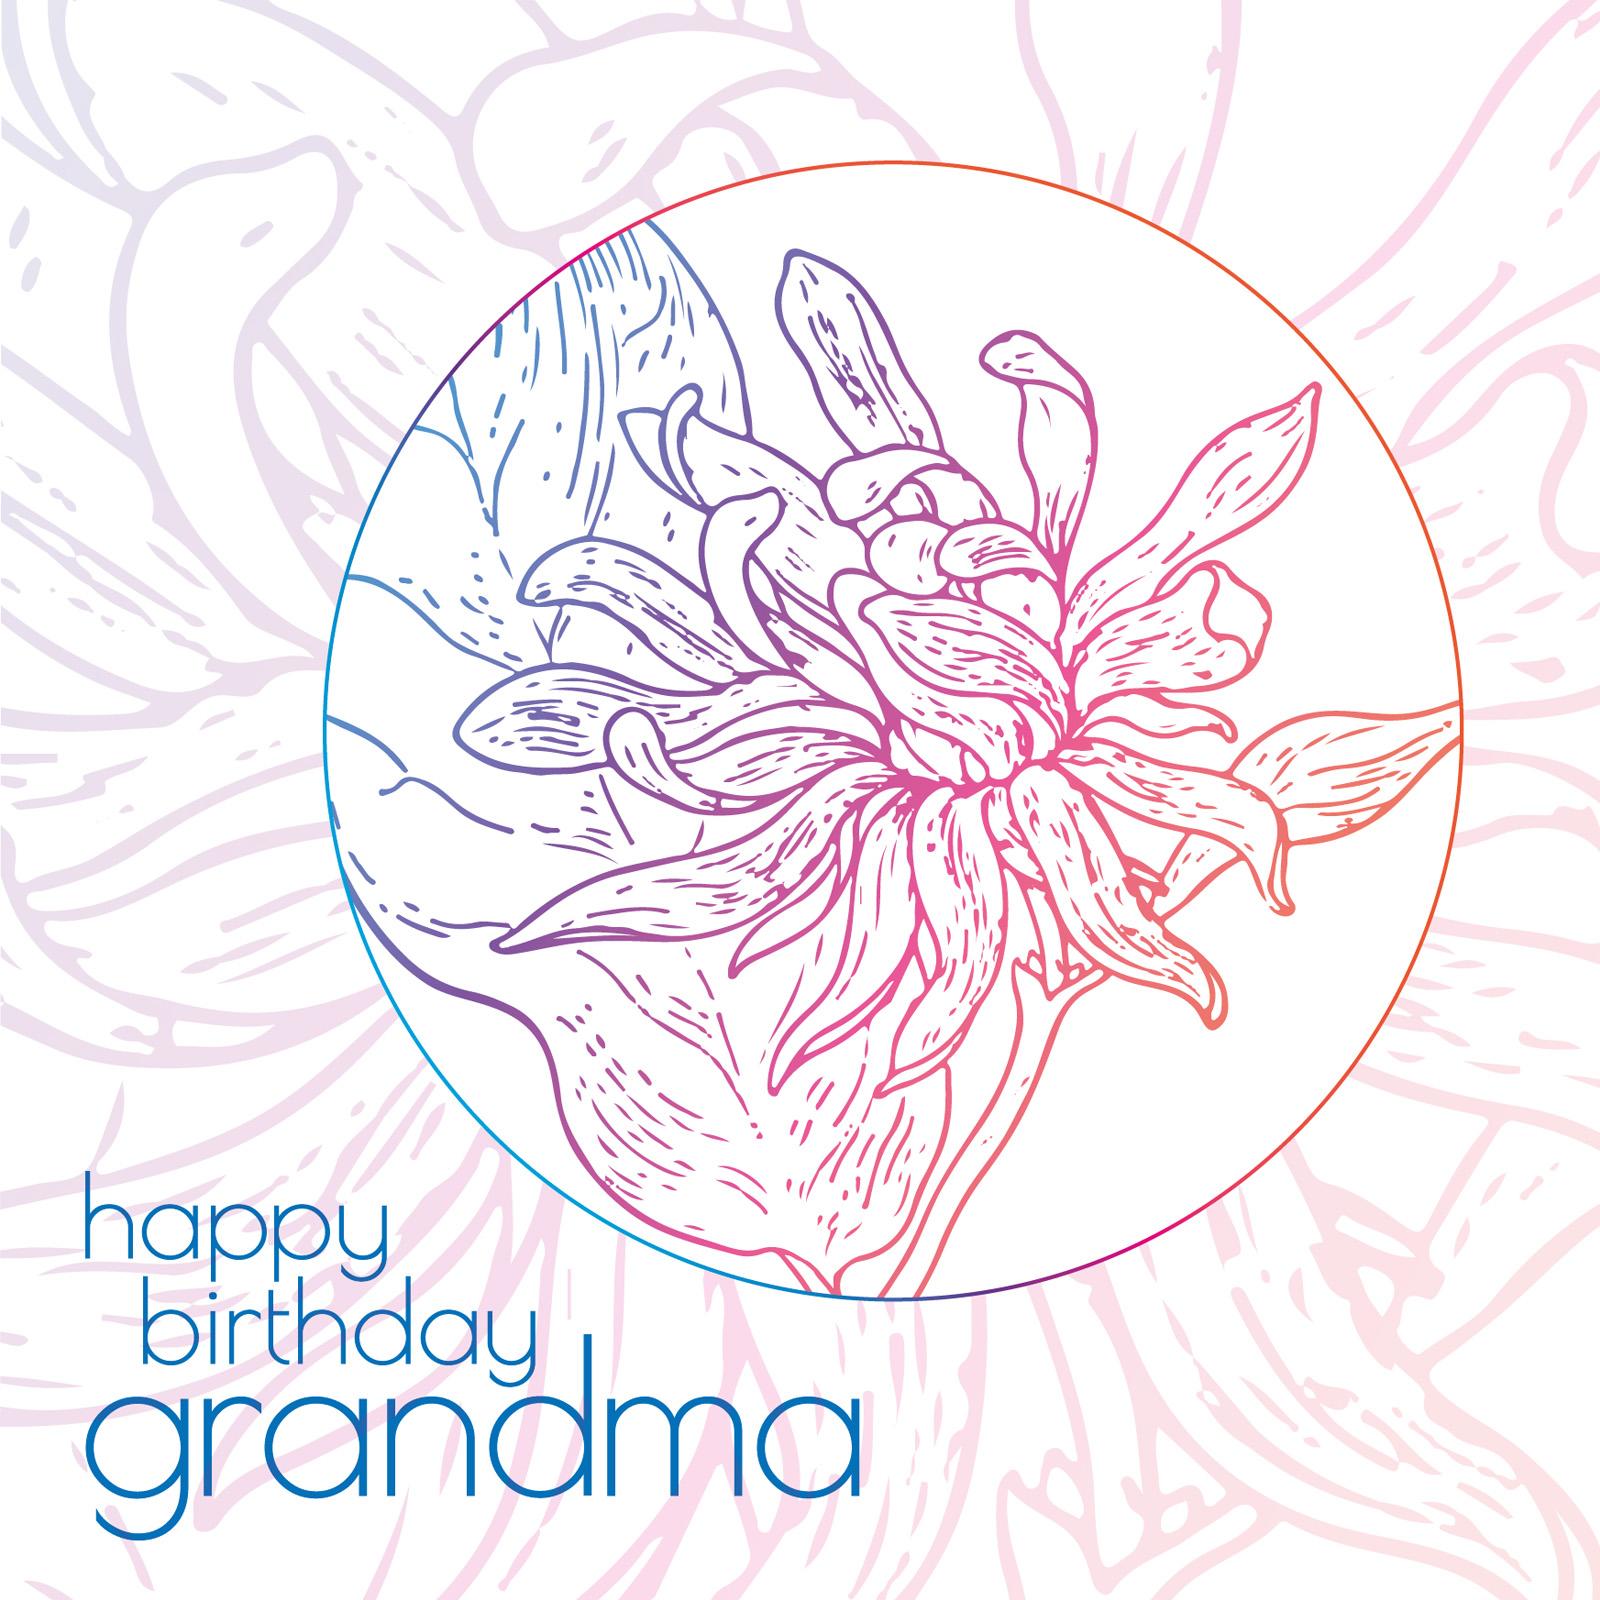 Line illustration of flowers in a pastel coloured gradient and the text happy birthday grandma